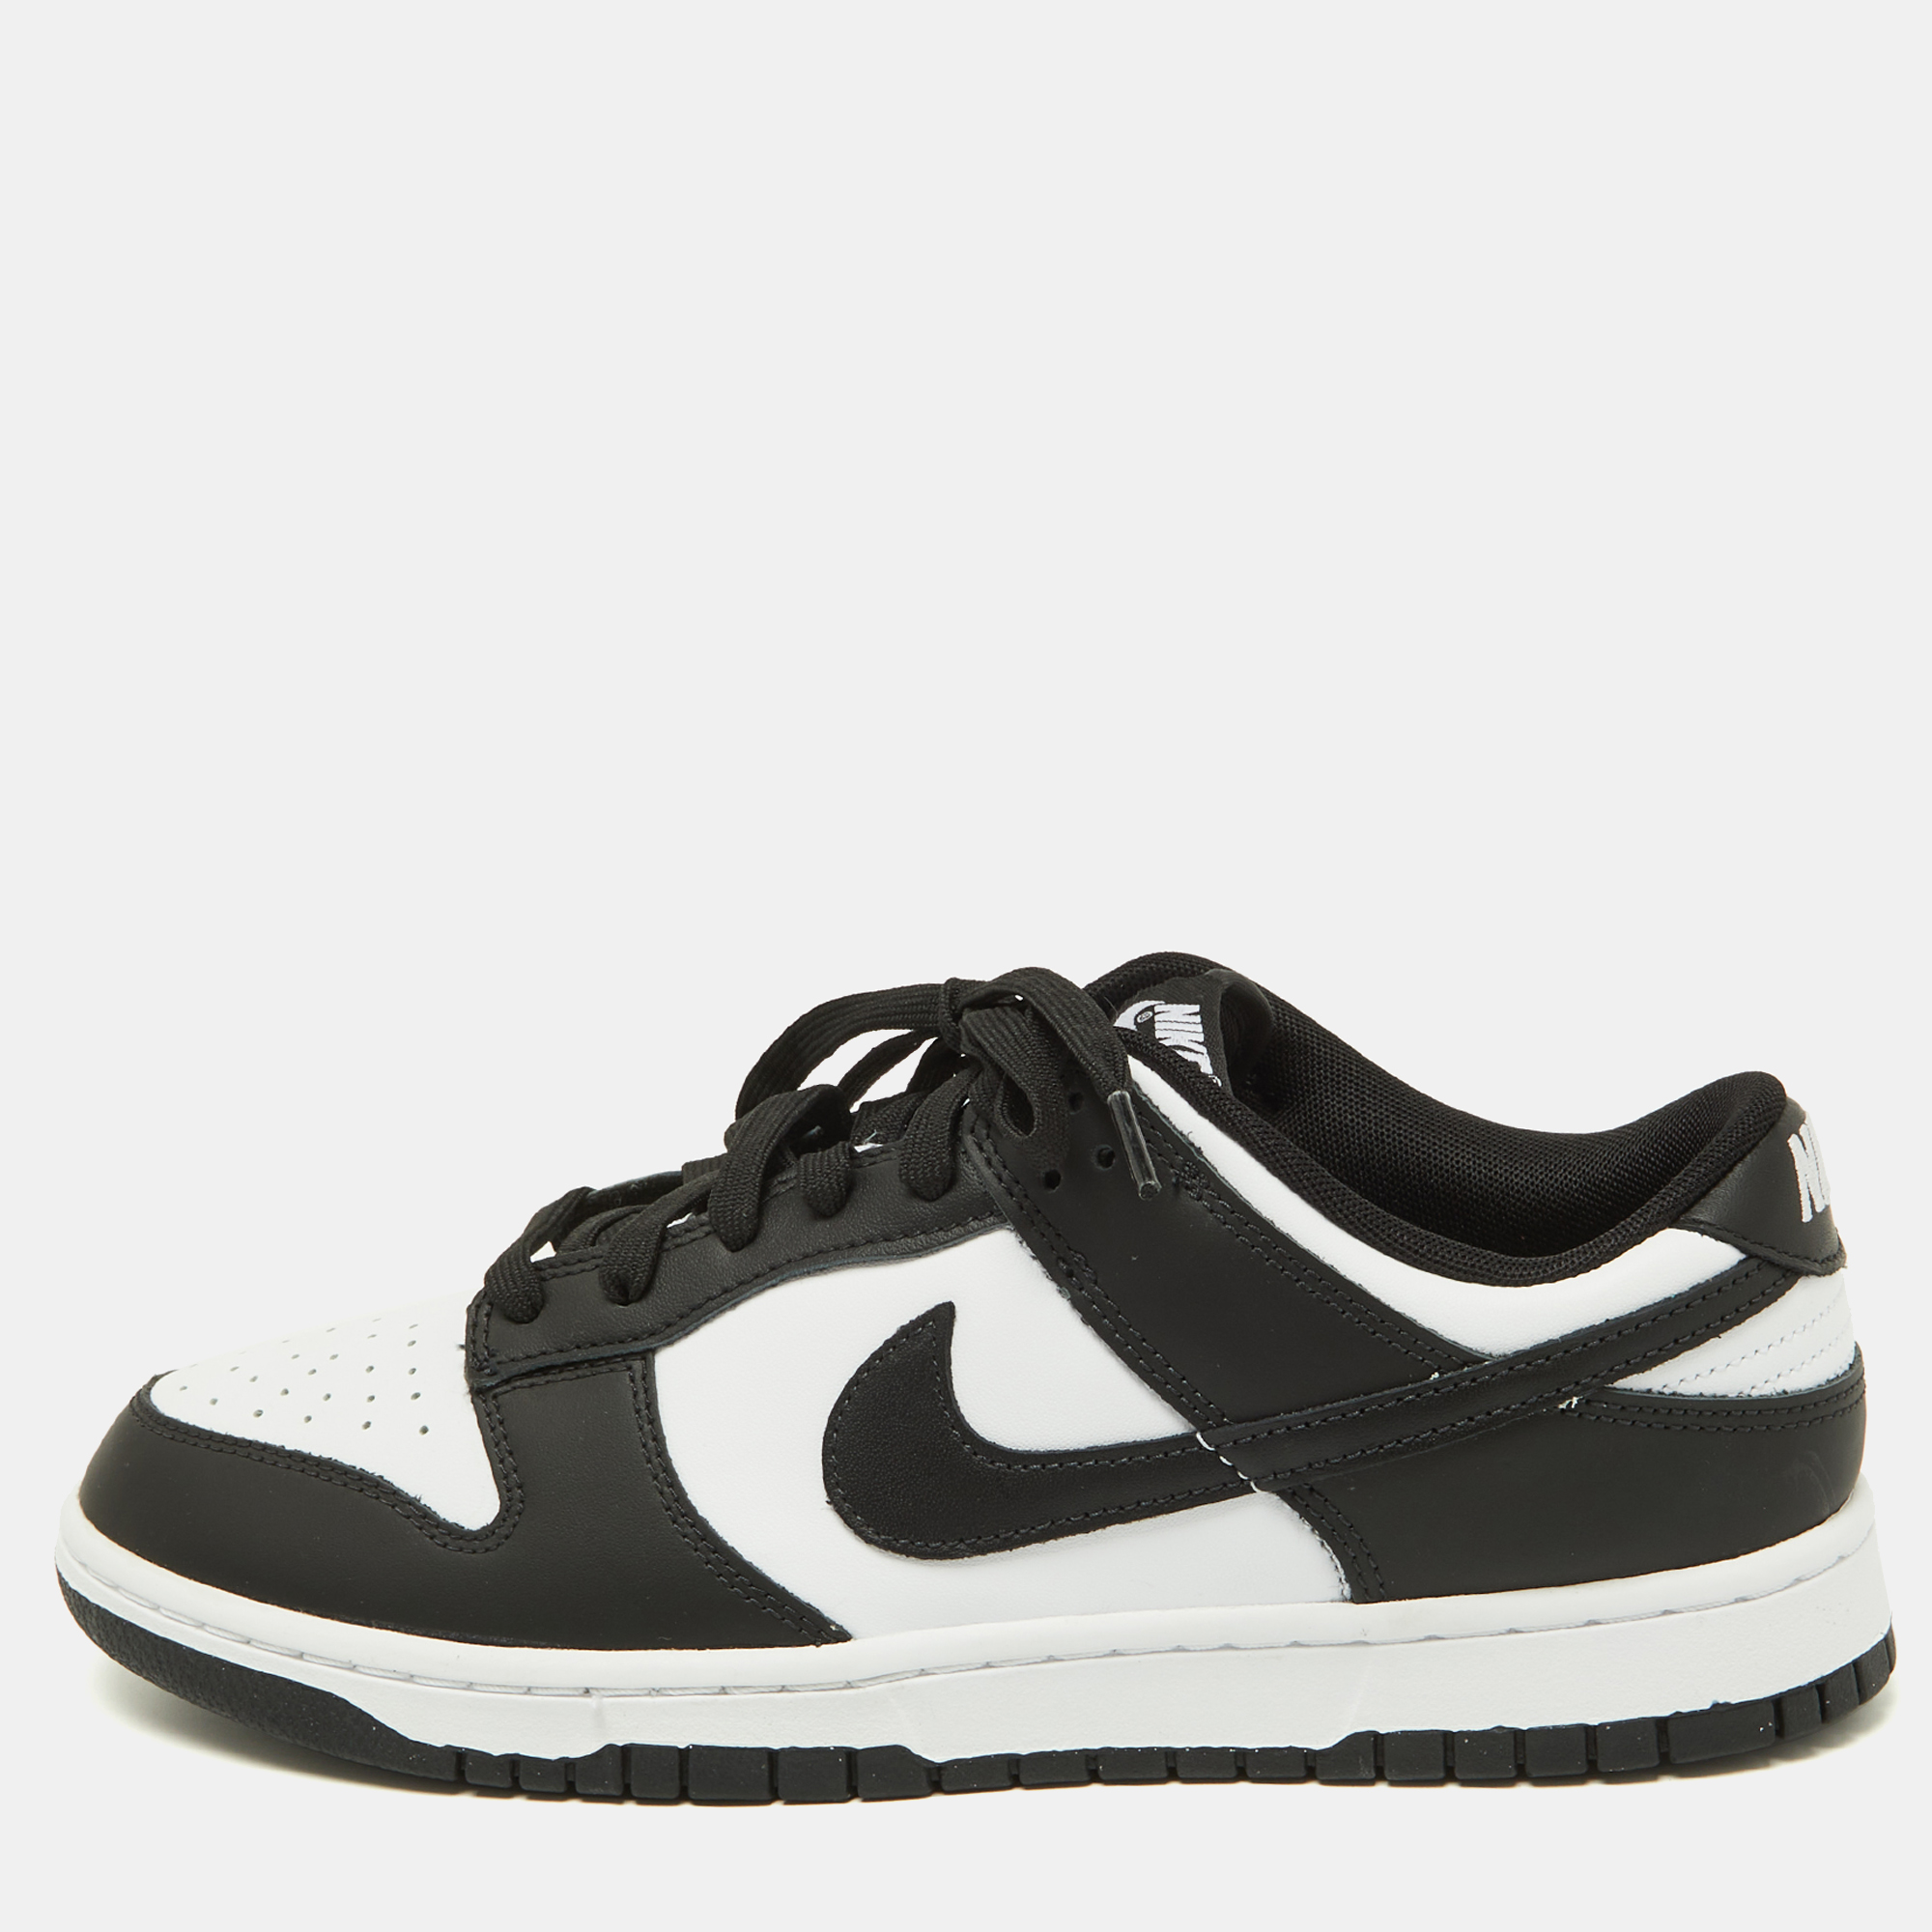 Nike black/white leather dunk low top sneakers size 45